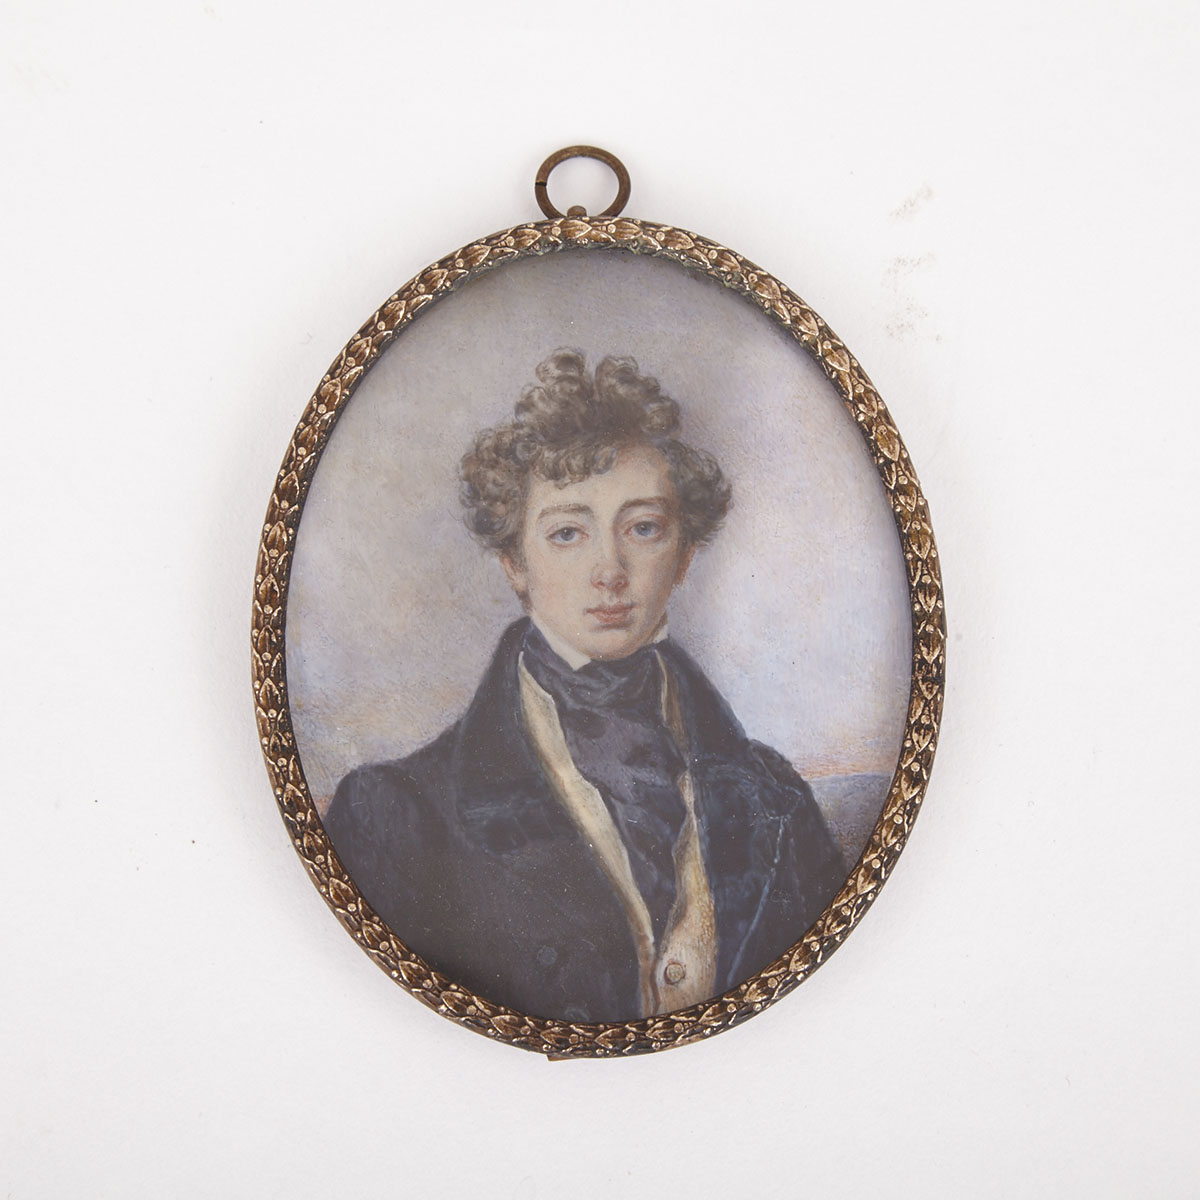 English School Portrait Miniature of a Young Gentleman, early 19th century